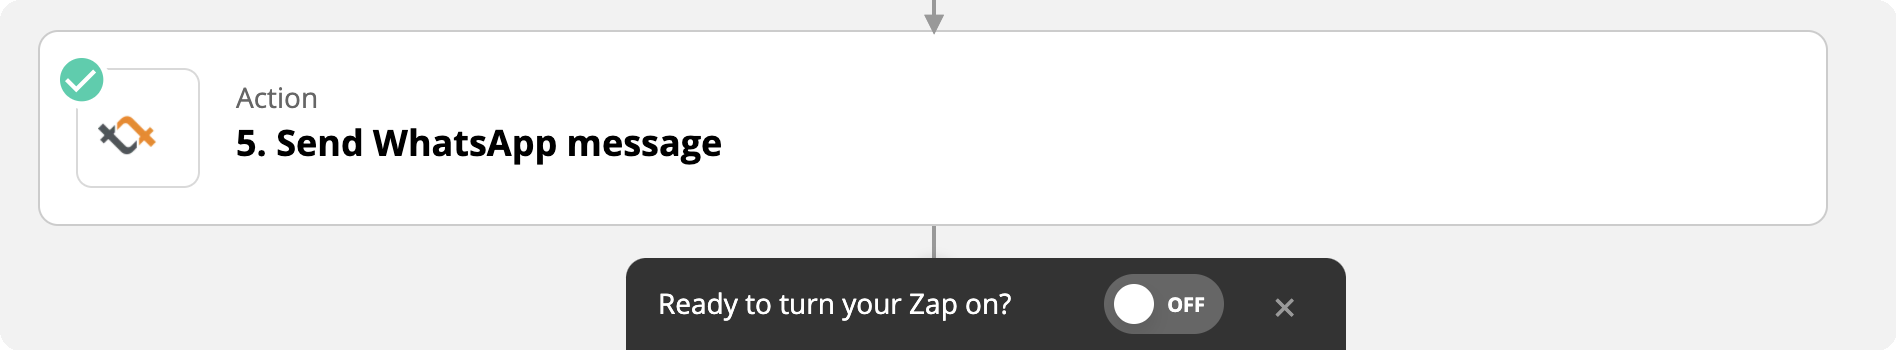 Turn on your second Zap